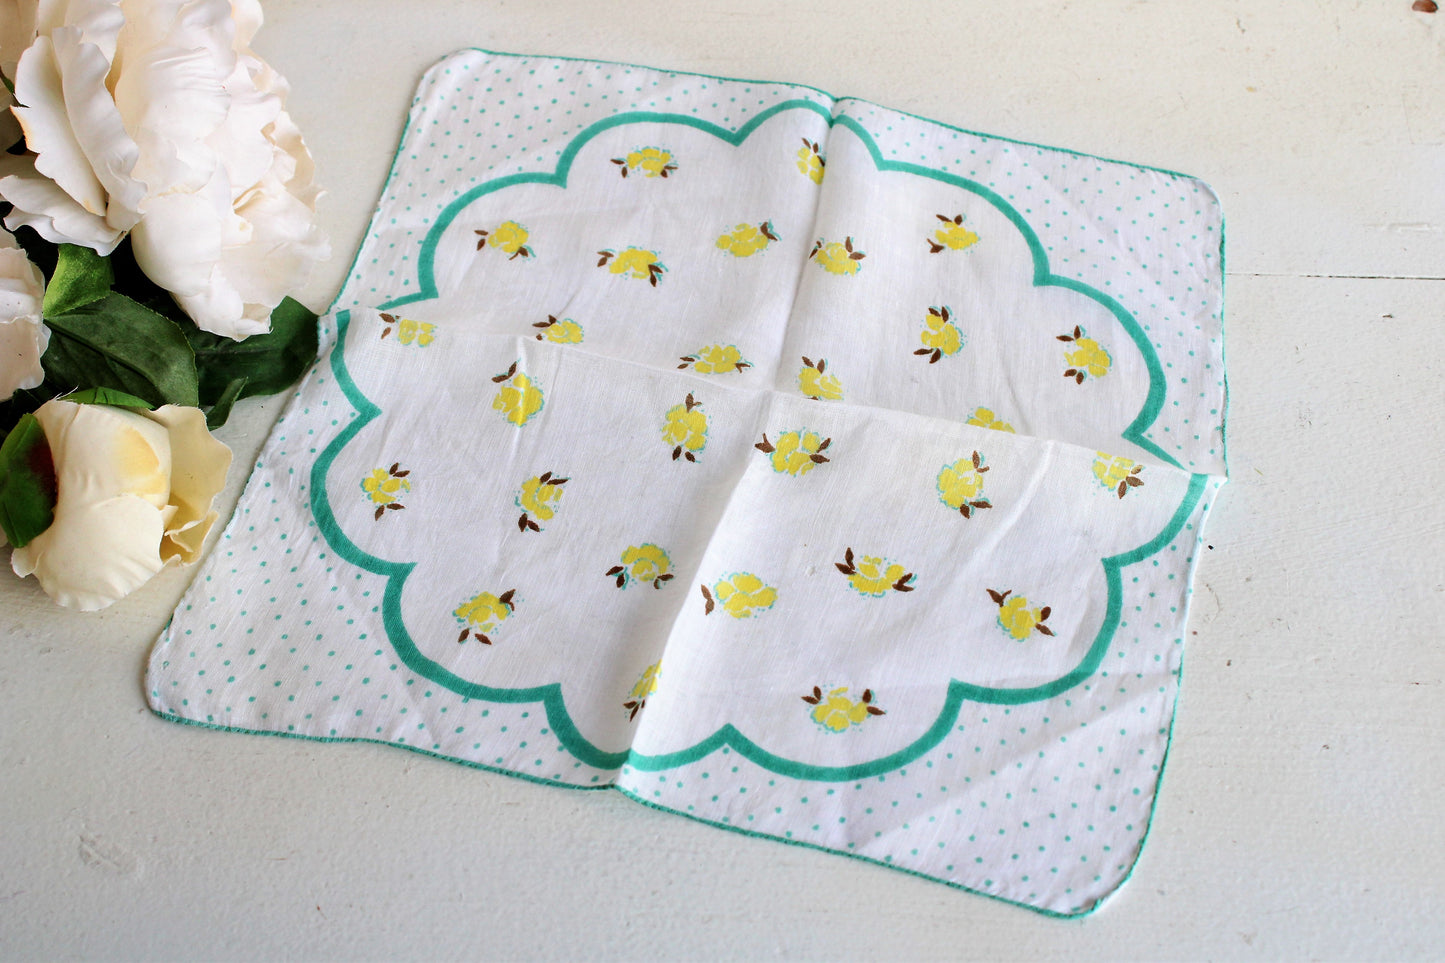 Vintage Cotton Hanky with Yellow Roses and Teal Polkadots